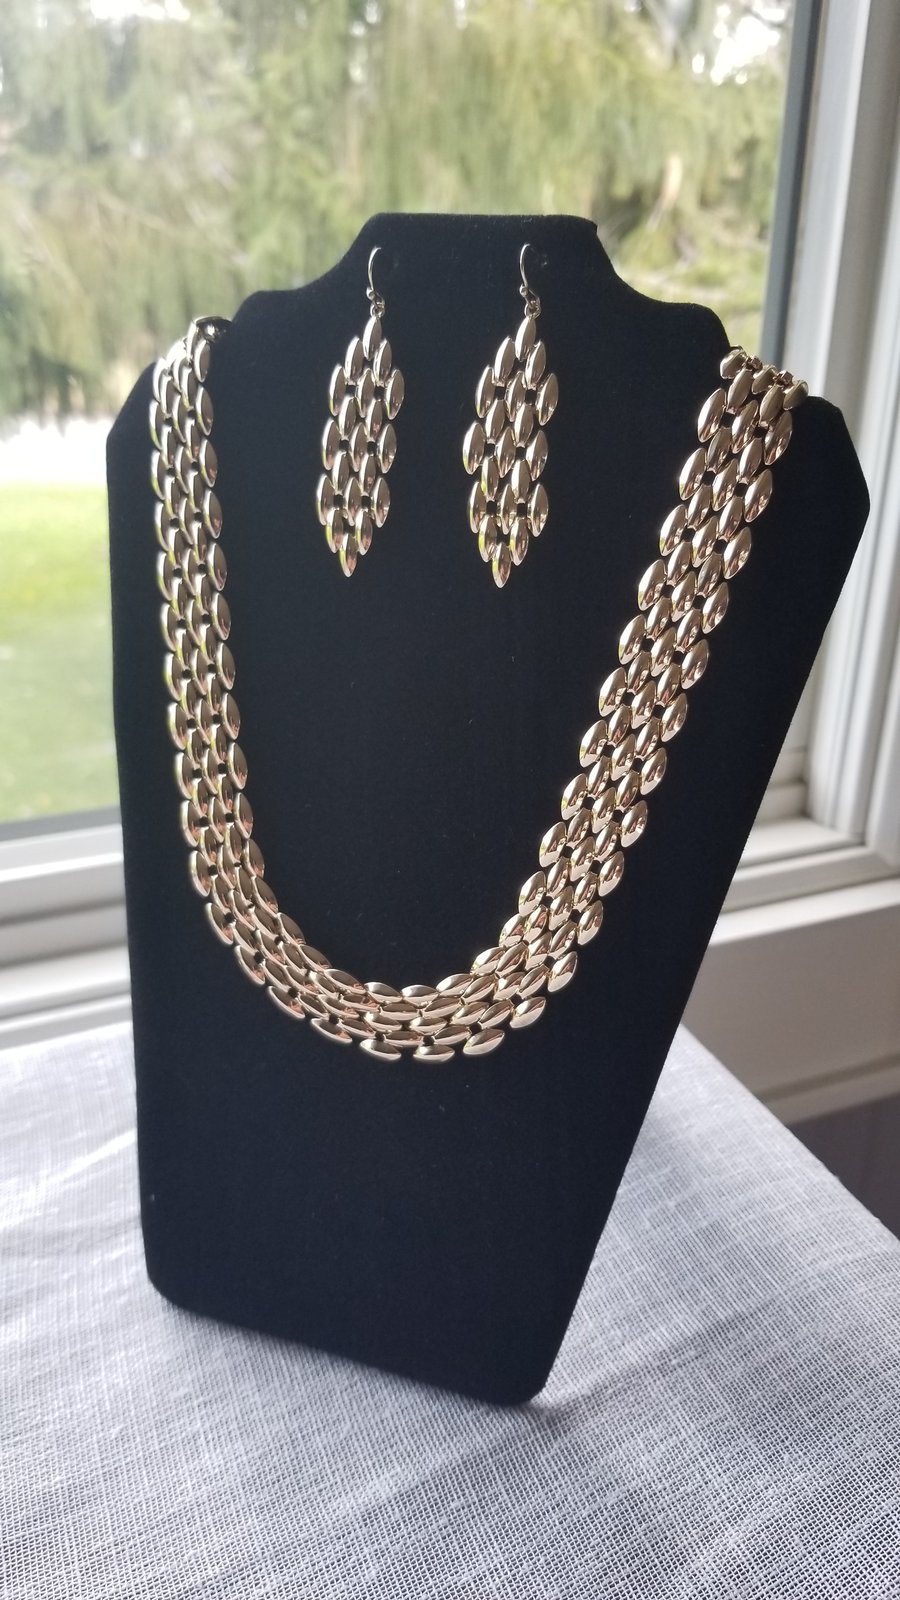 Jewelryweb 14k Yellow Gold 9.0mm Shiny 7 Row Panther Chain Link Necklace  With Box Catch